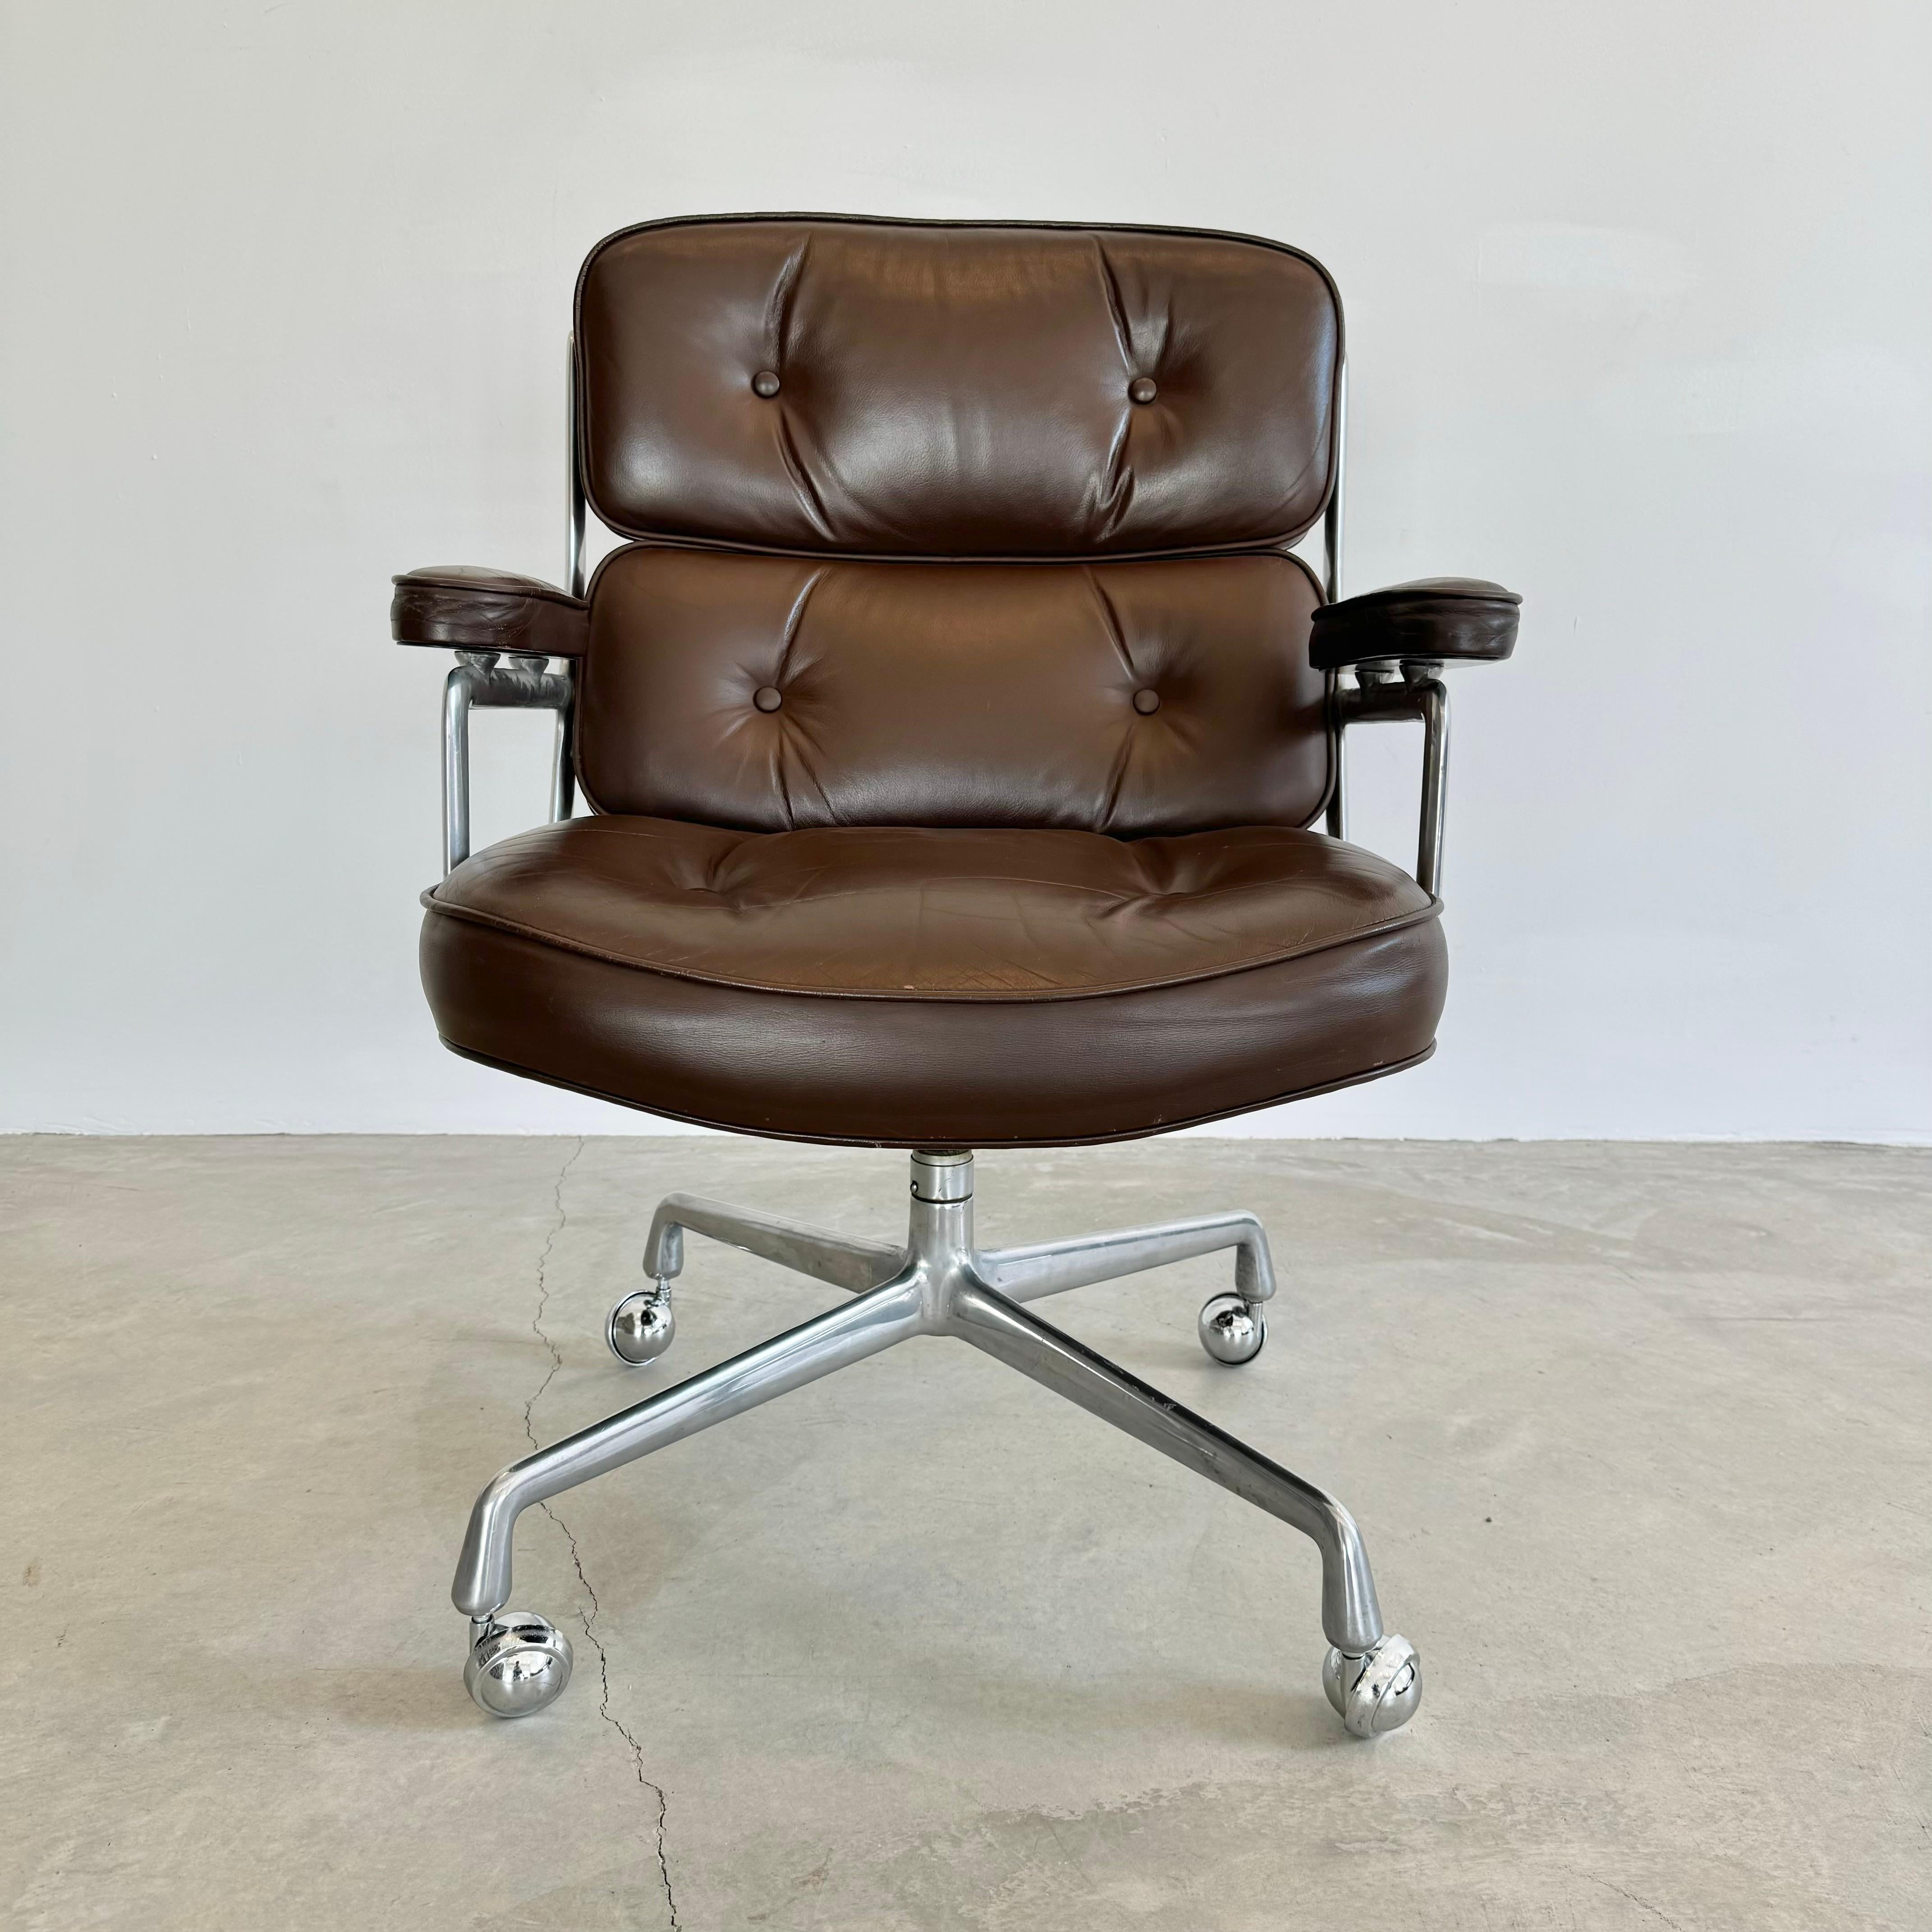 Eames Time Life Chair in Chocolate Leather for Herman Miller, 1978 USA For Sale 4